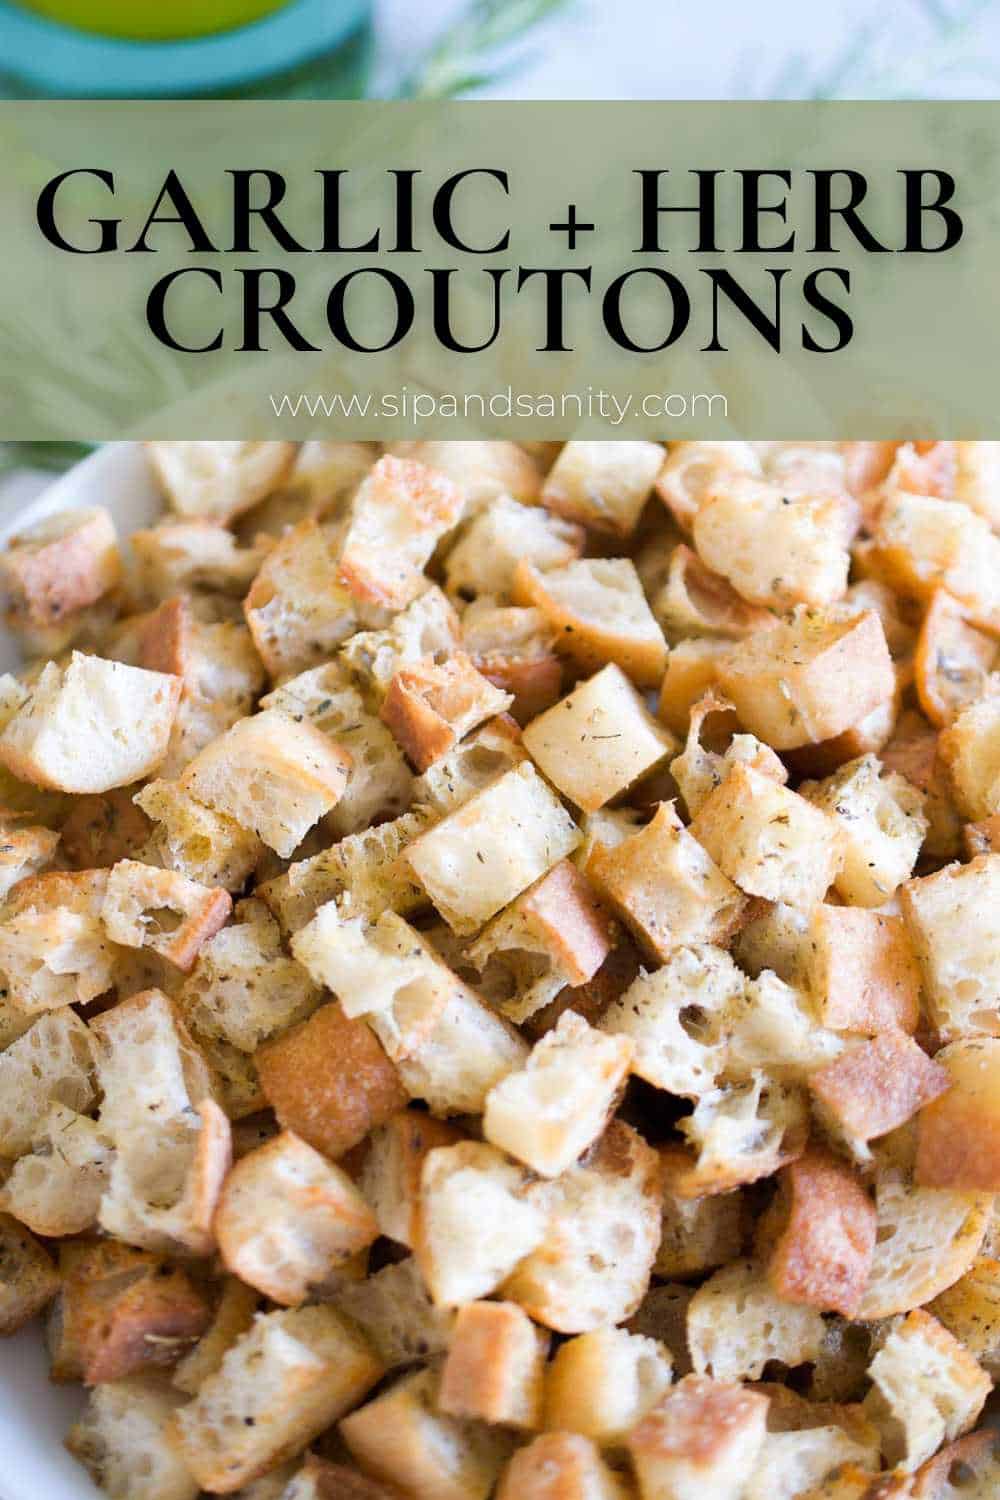 Pin image for garlic and herb croutons.